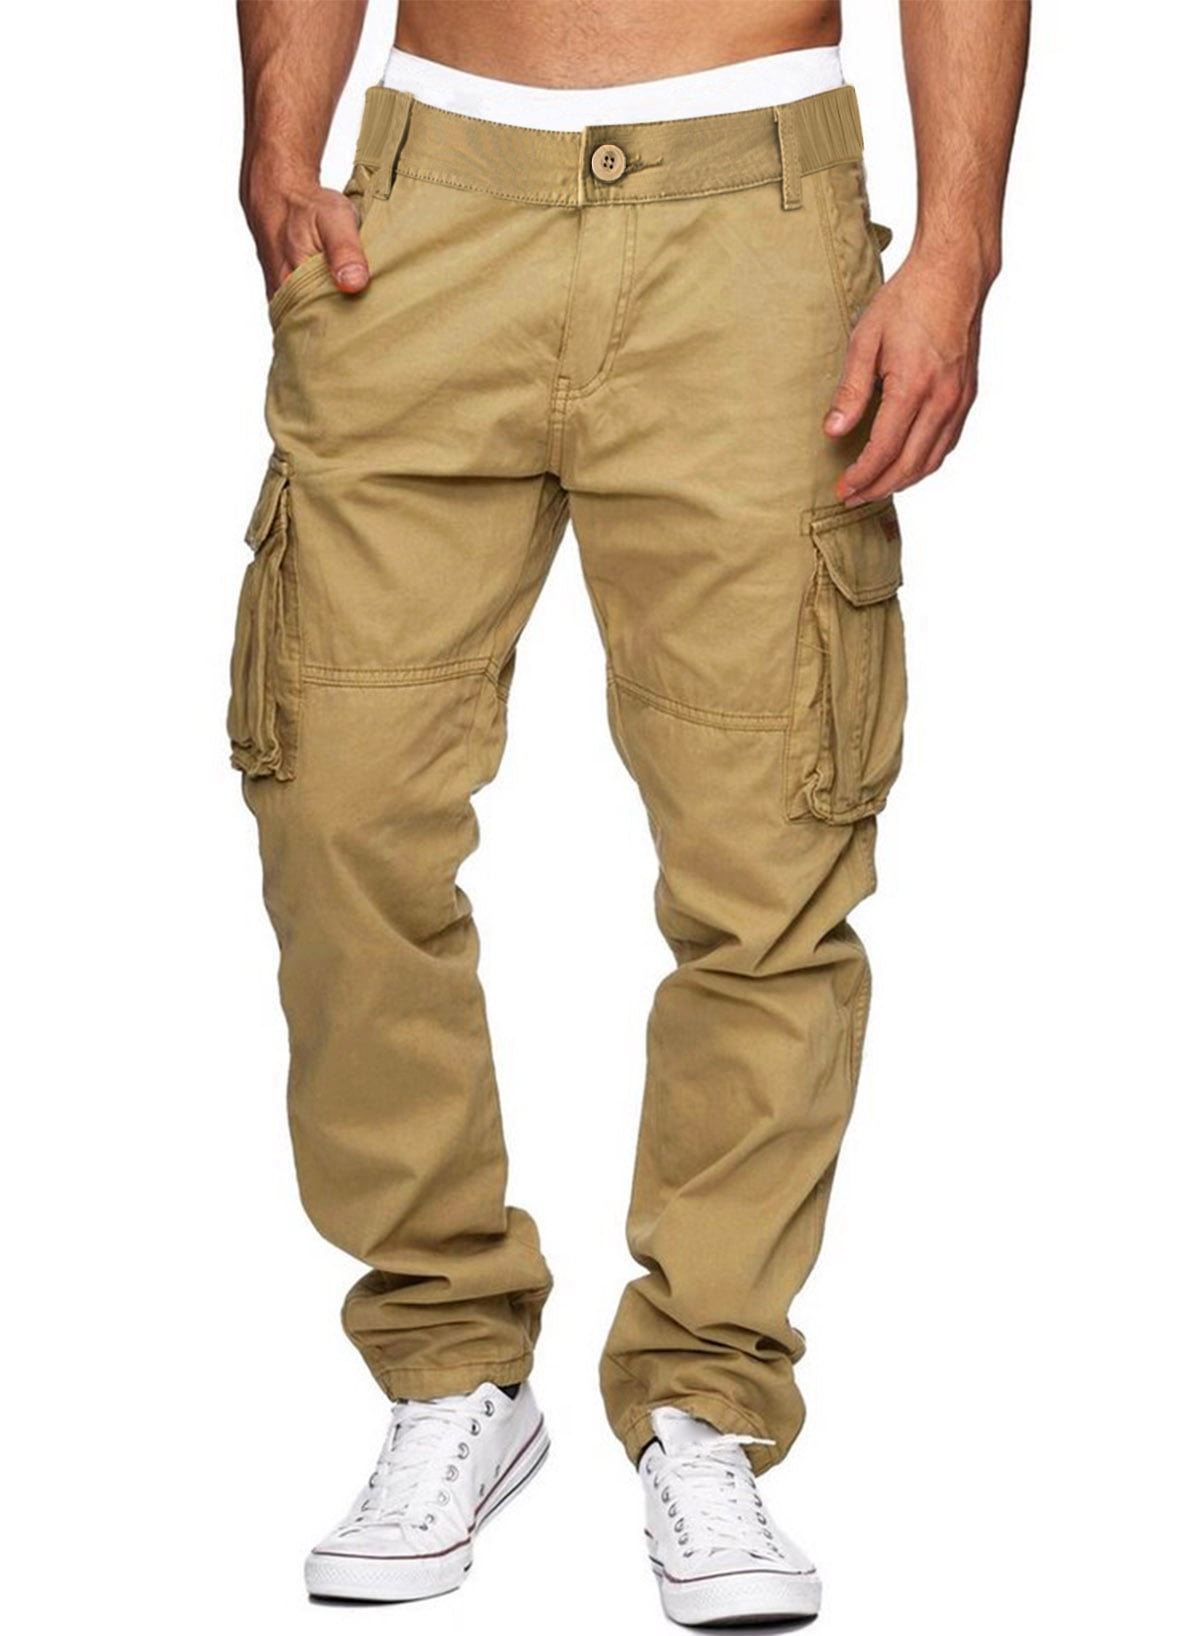 JMIERR Big and Tall Mens Cargo Pants Lightweight Baggy Pants Stretch ...